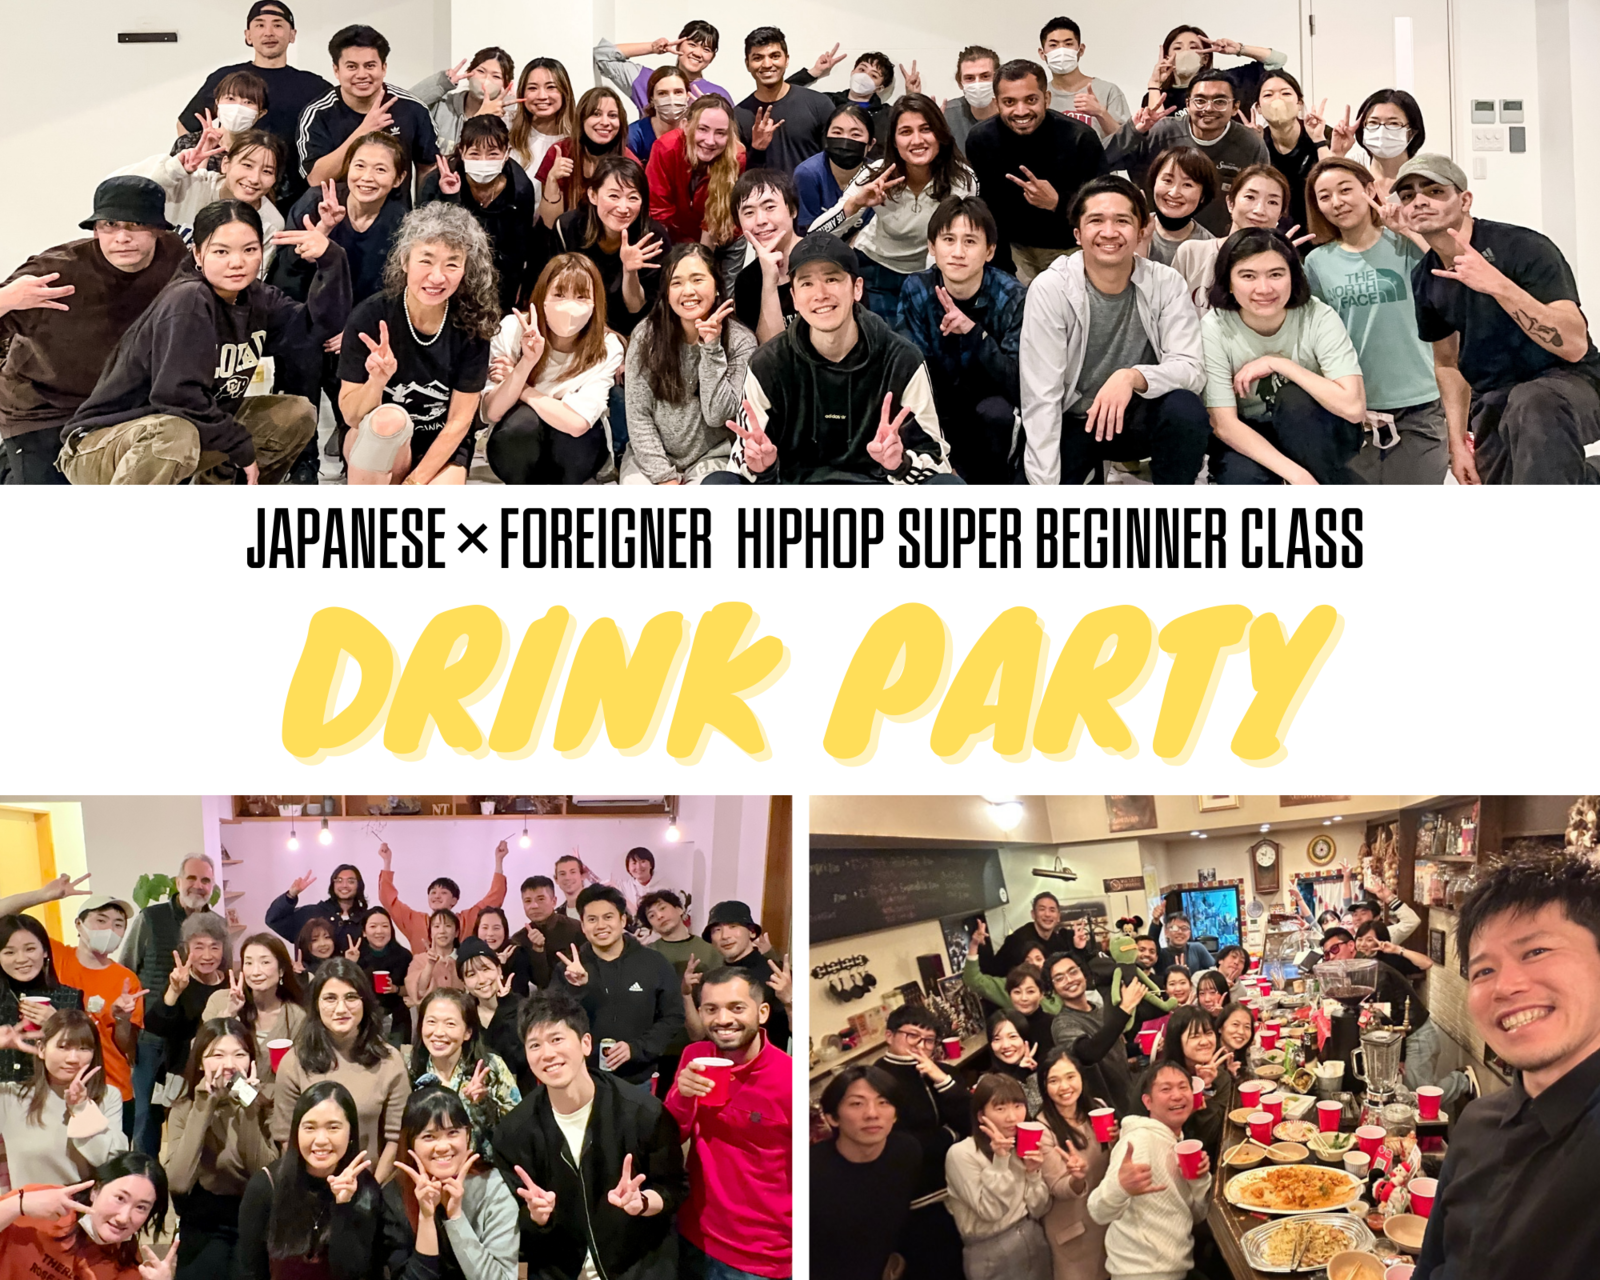 DRINK PARTY Japanese × Foreigner HIPHOP Super Beginner Class